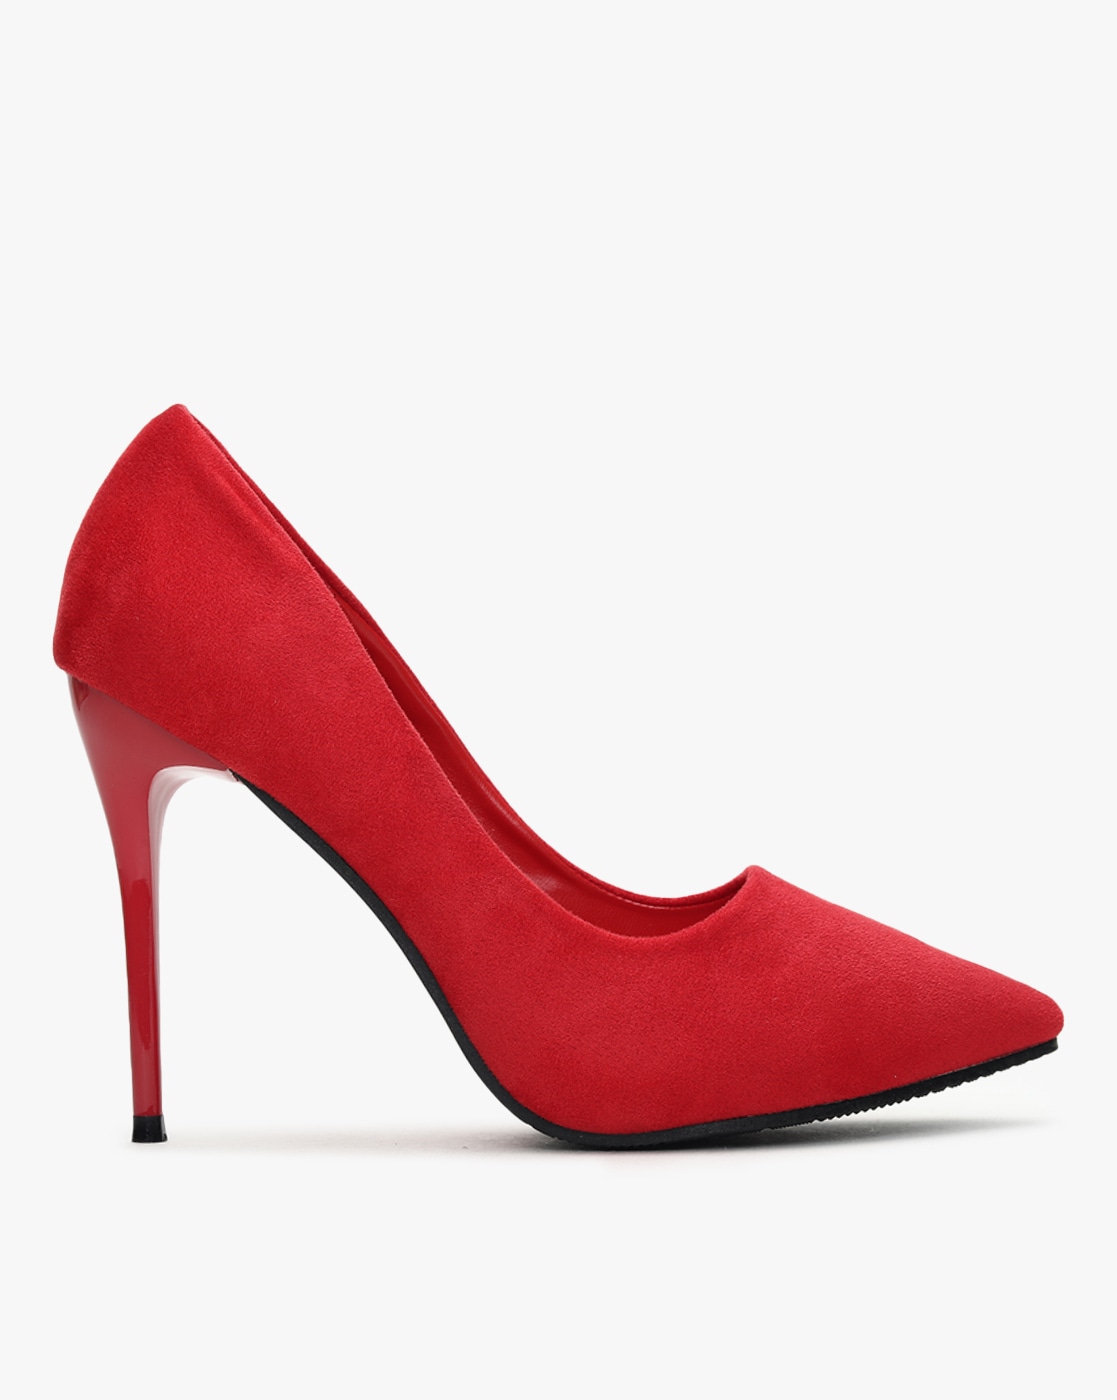 Female Wearing Red Heels Stock Photos - 35,014 Images | Shutterstock